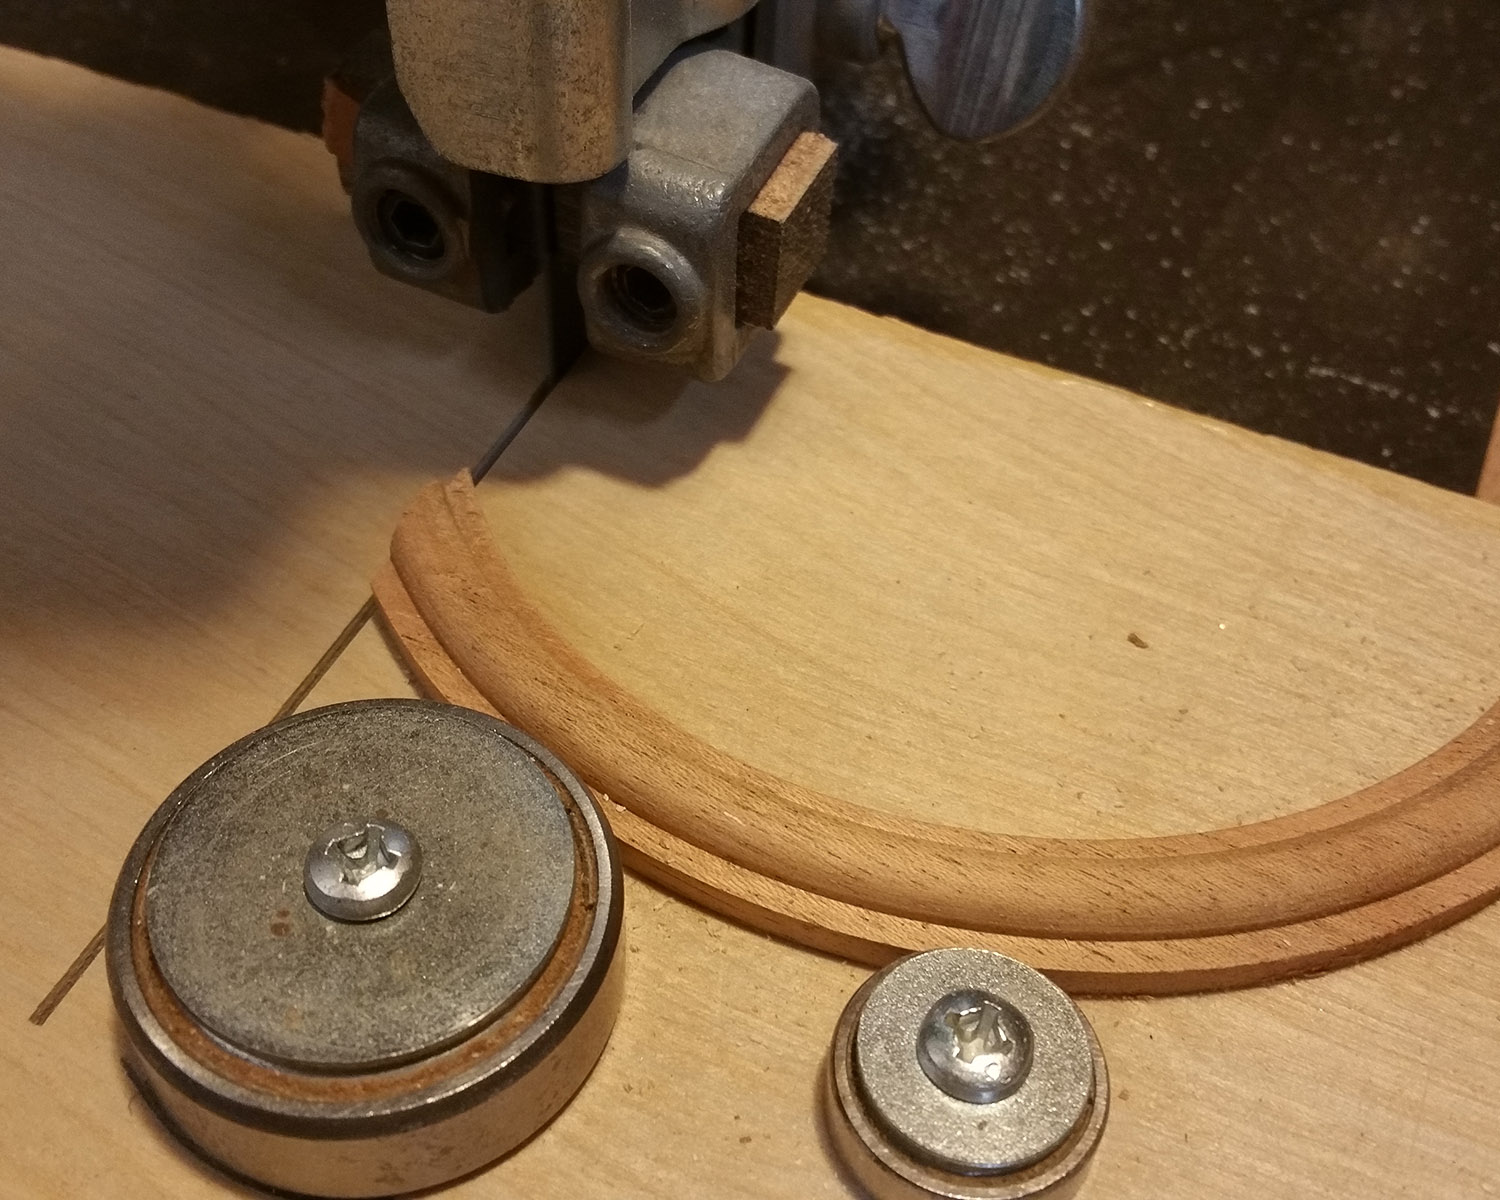 Make necessary adjustments to the bearing position.